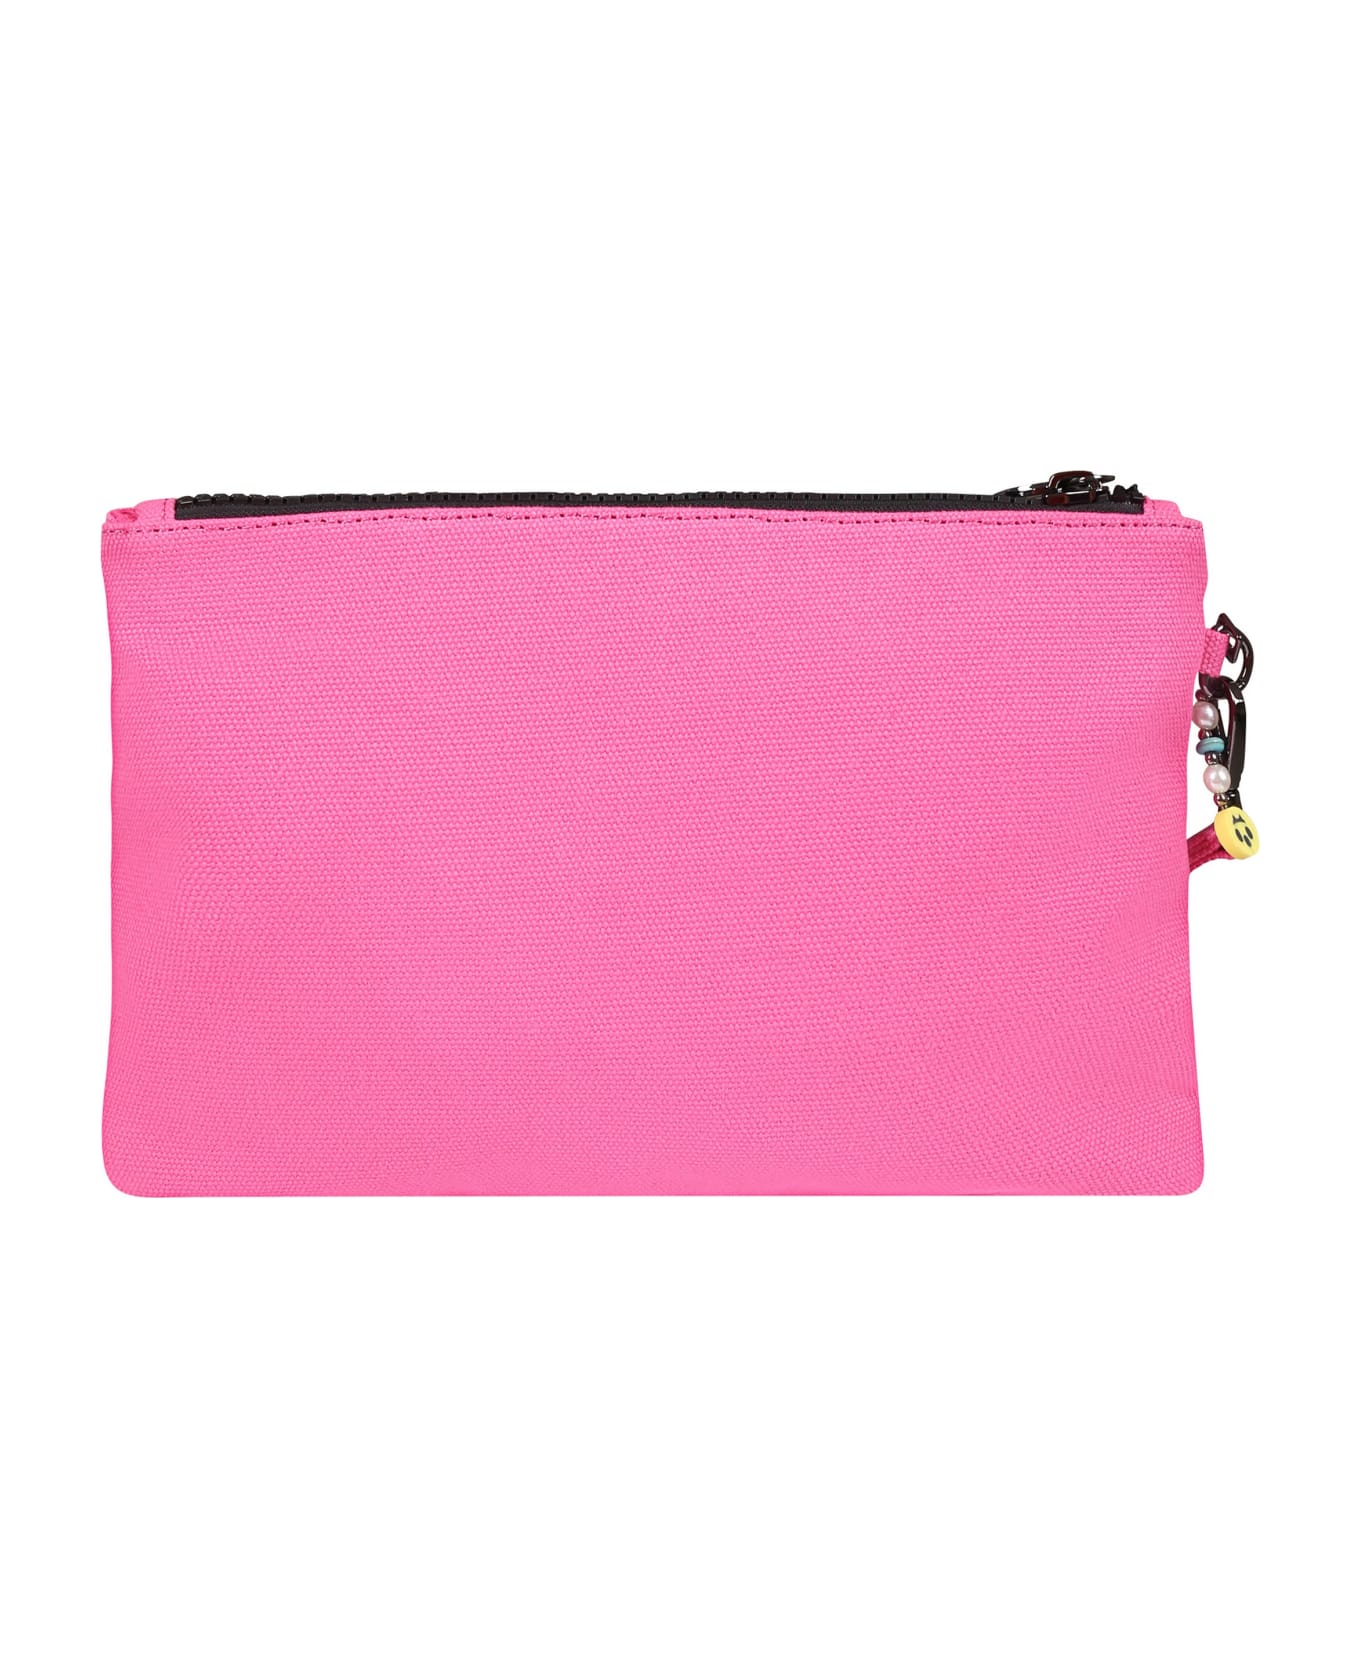 Barrow Fuchsia Clutch Bag For Girl With Logo And Smiley - Fuchsia アクセサリー＆ギフト